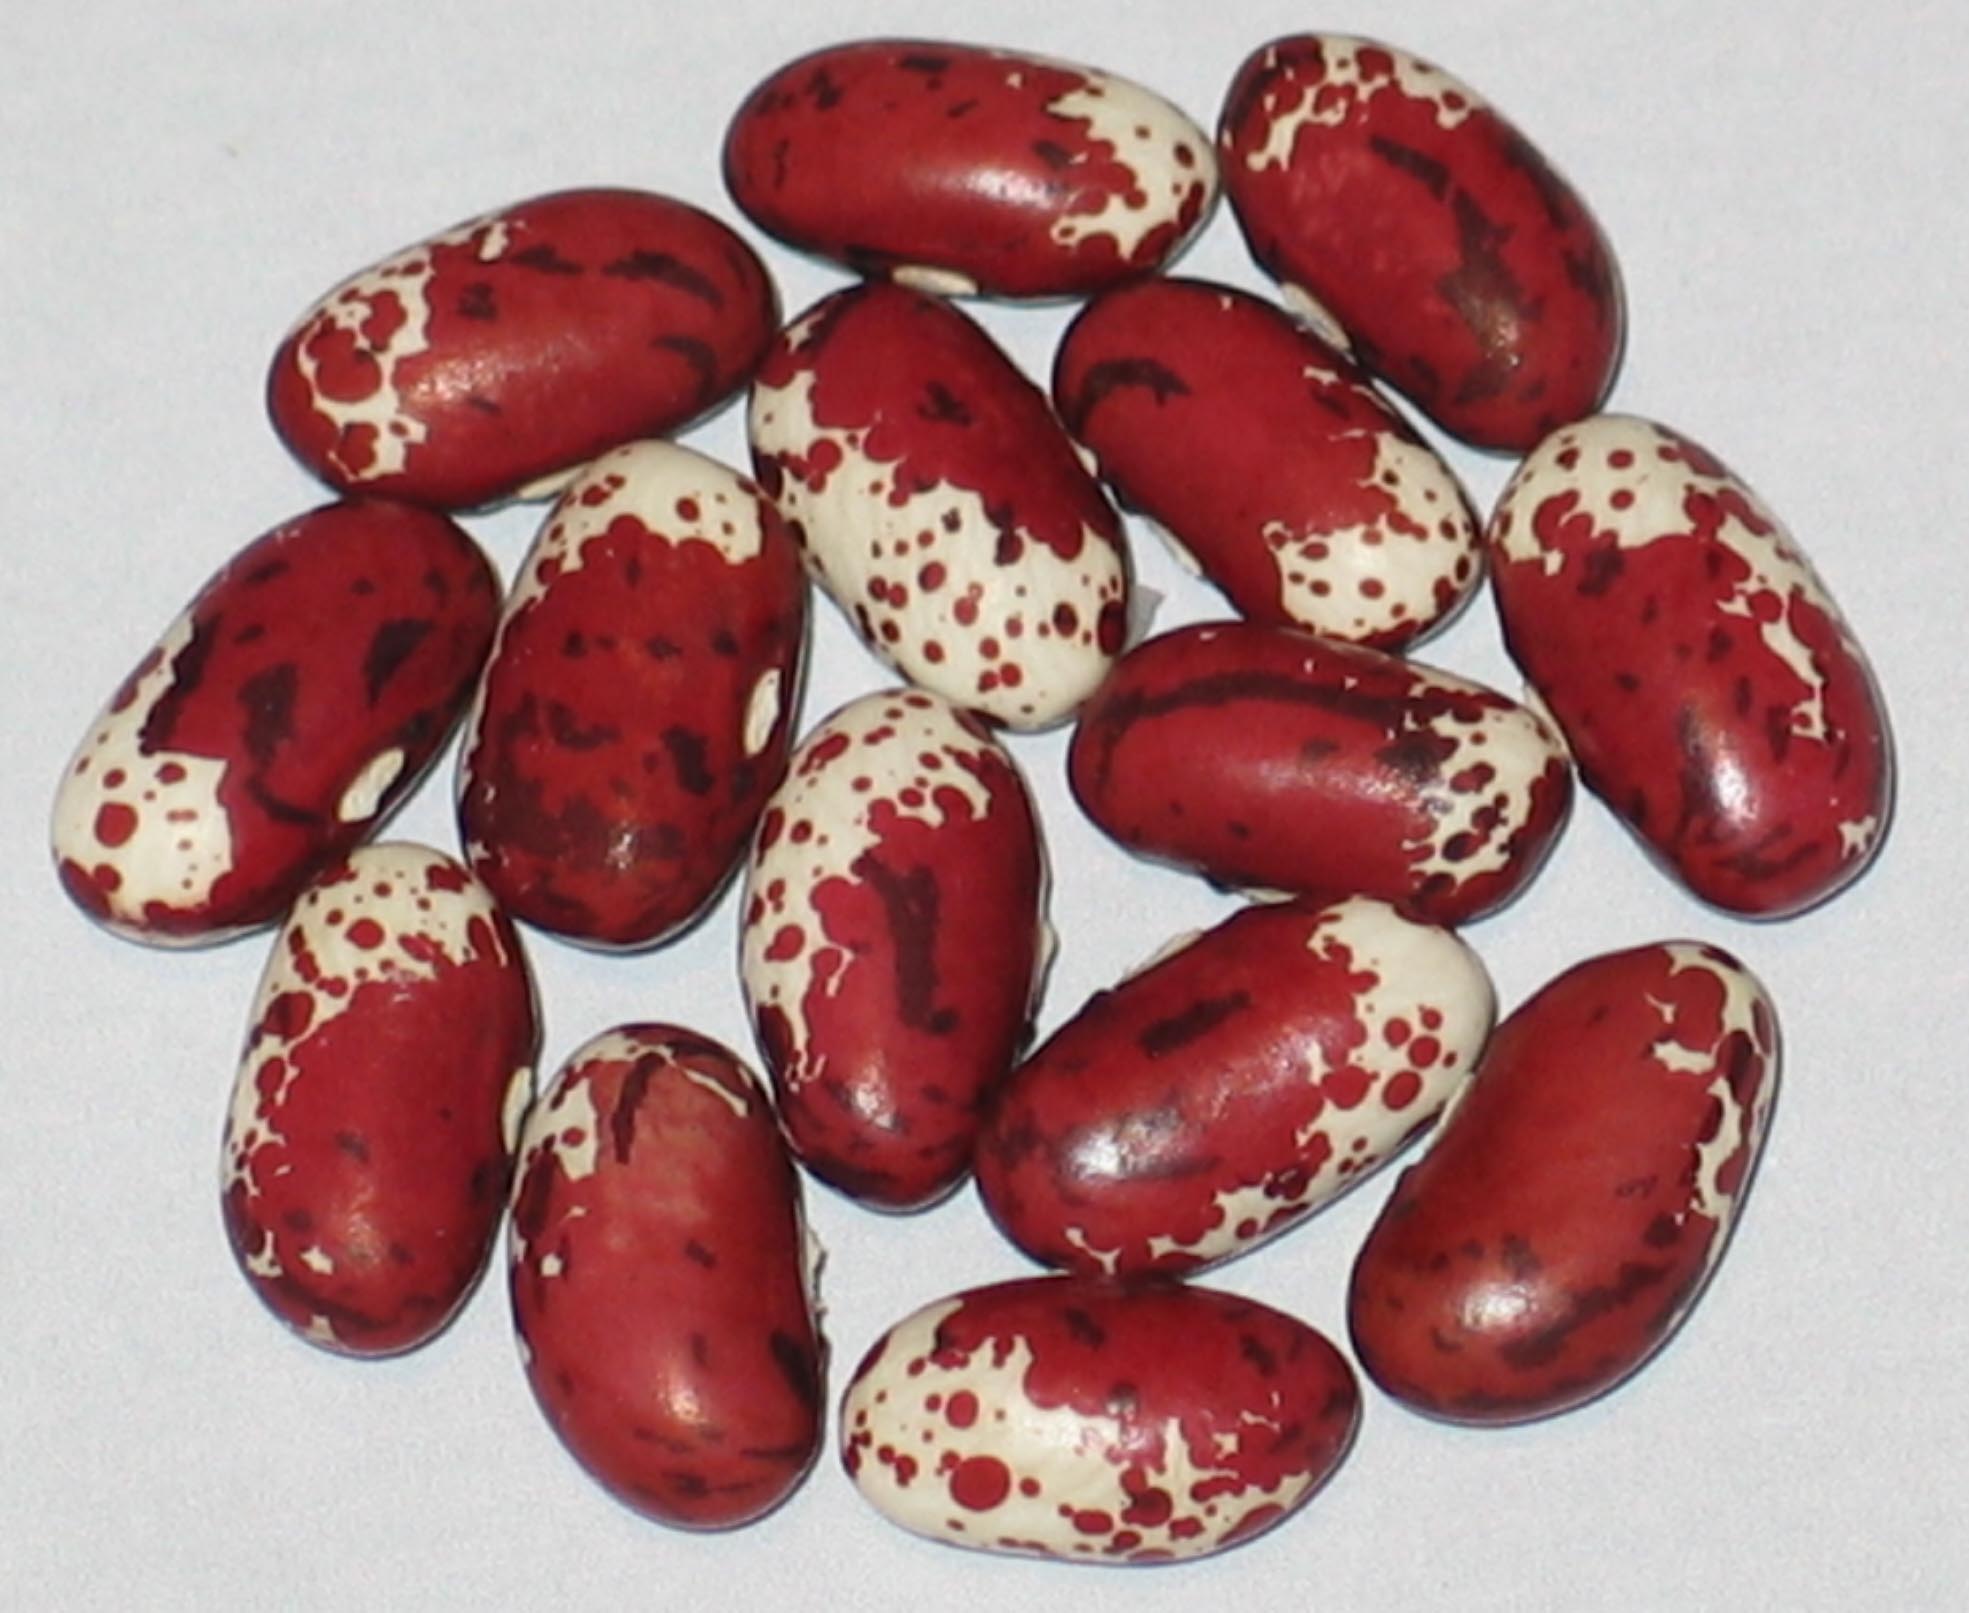 image of Sweetwater beans